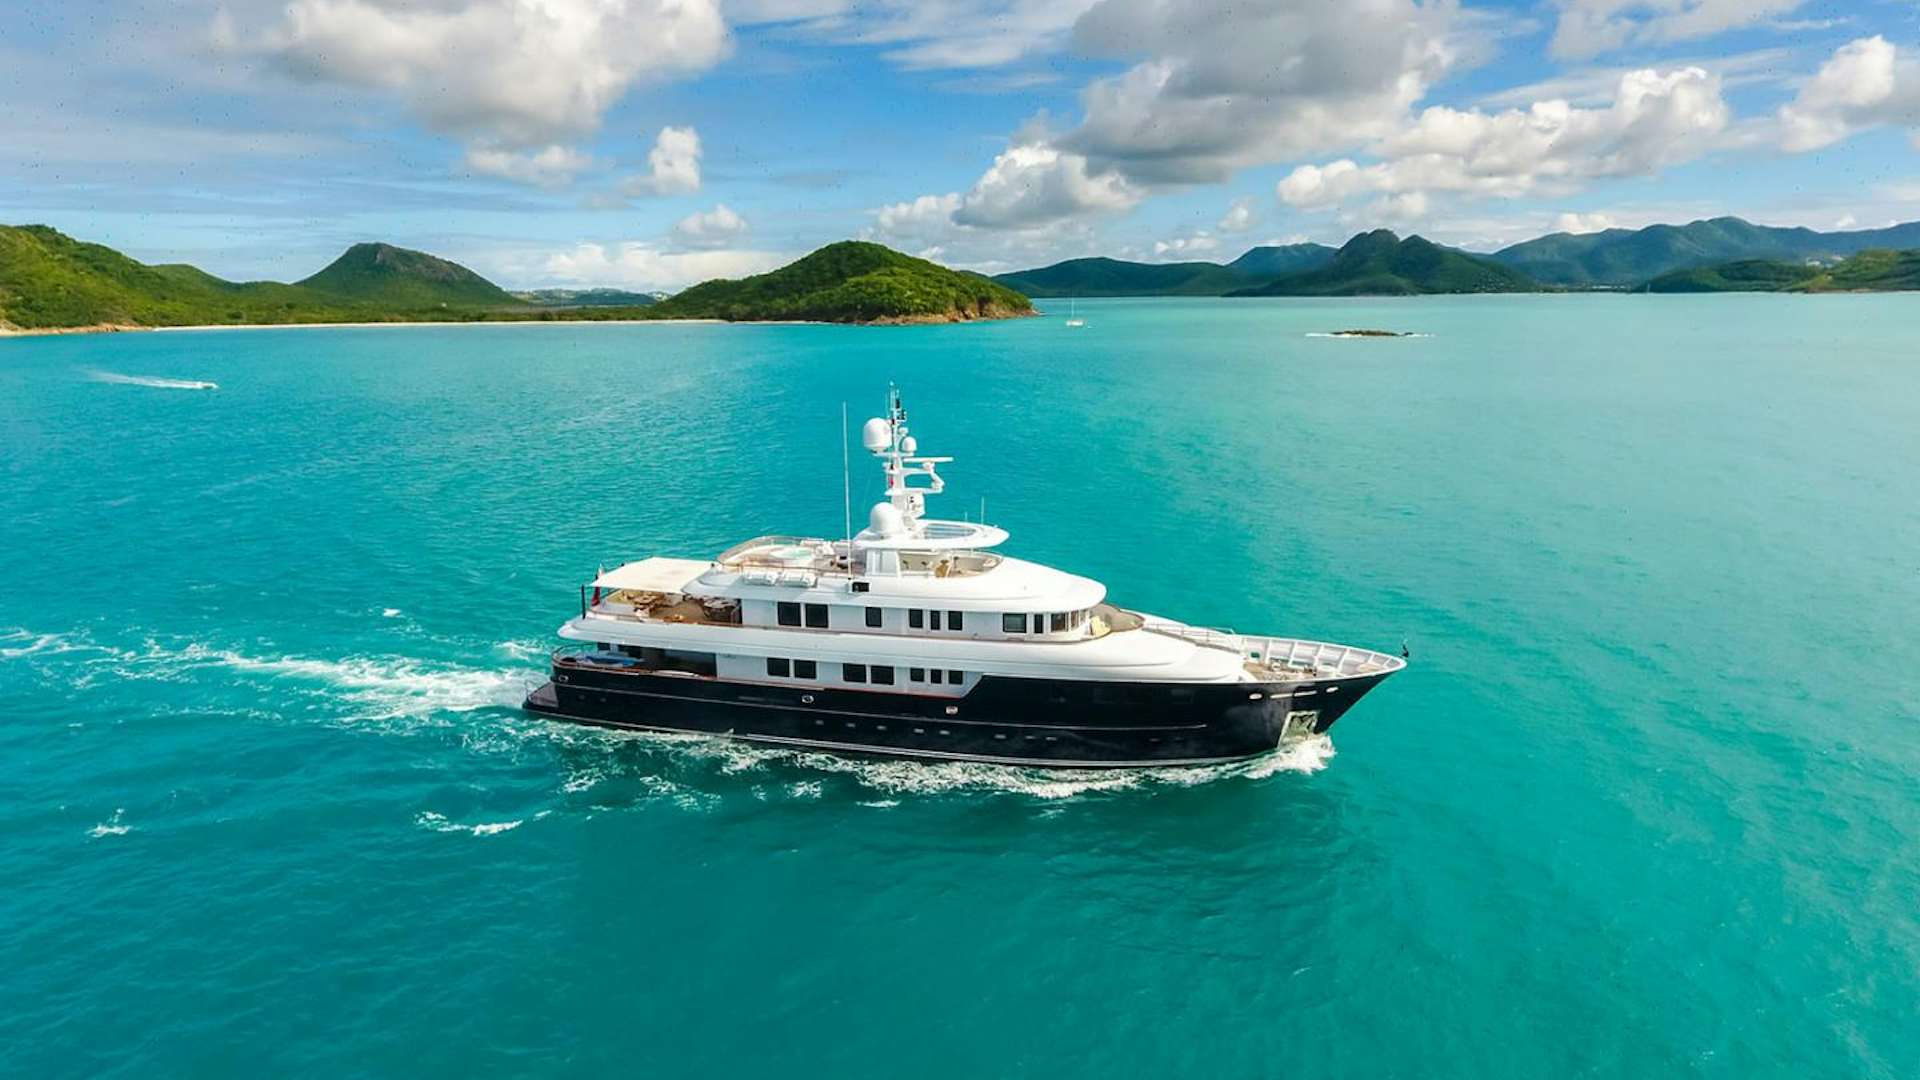 Watch Video for OCEAN'S SEVEN Yacht for Sale